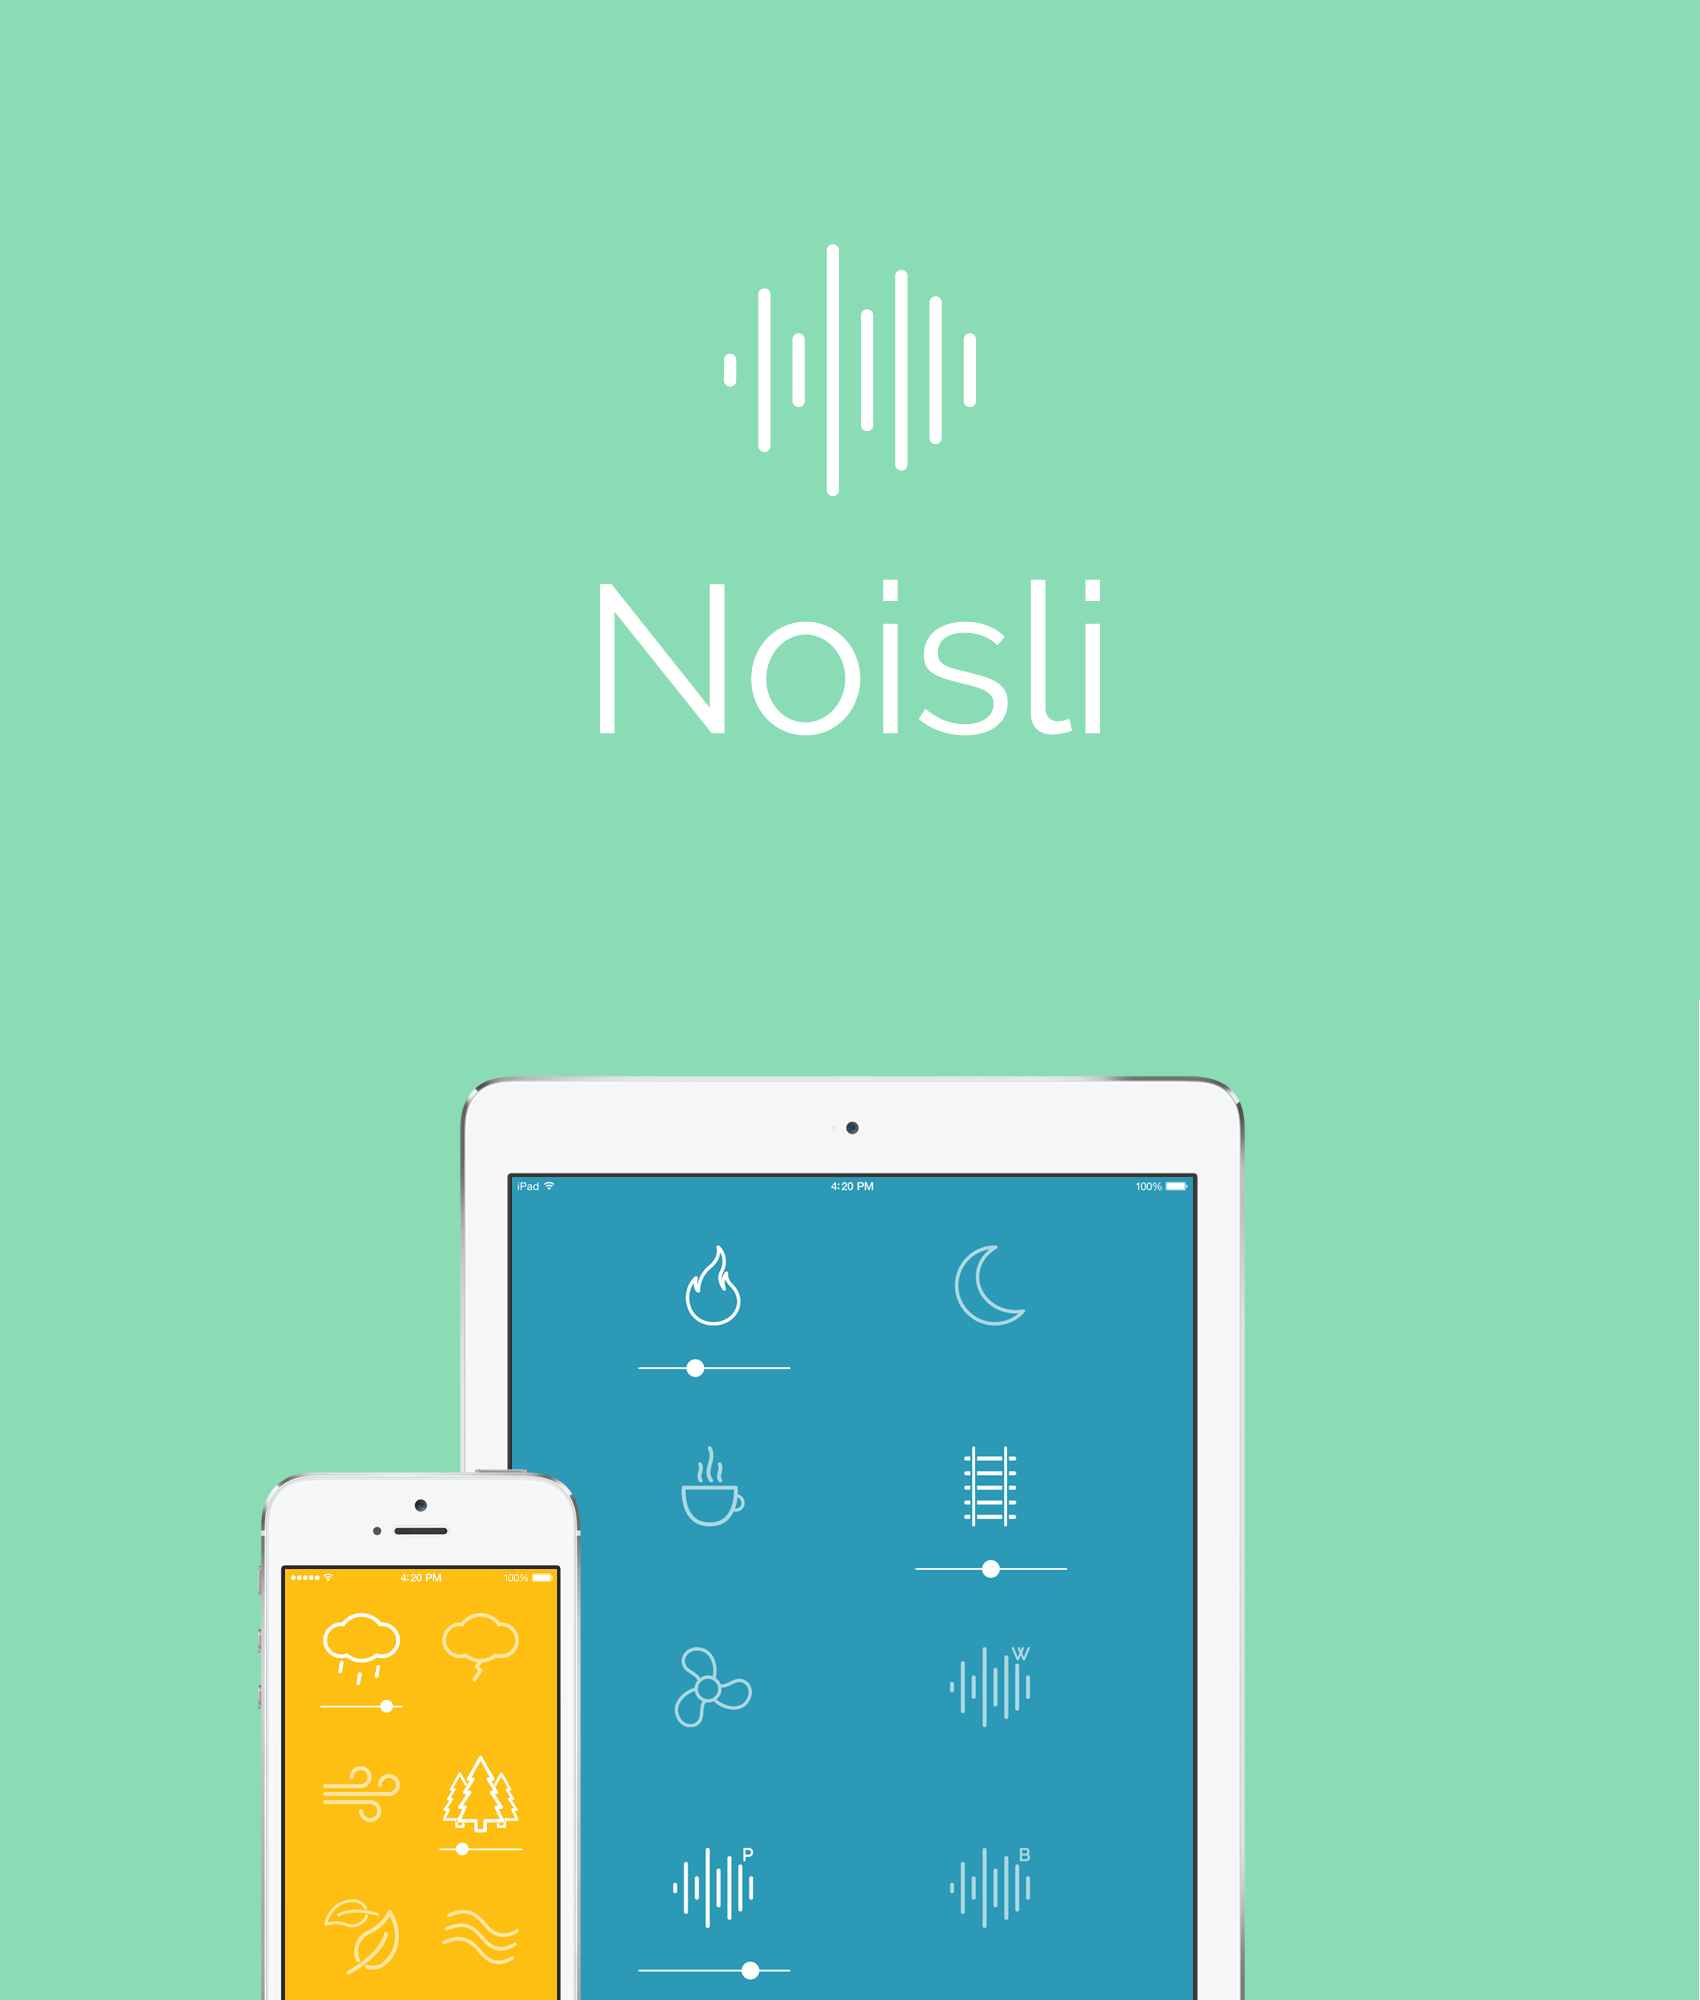 Noisili app shown on iPhone and Android phone